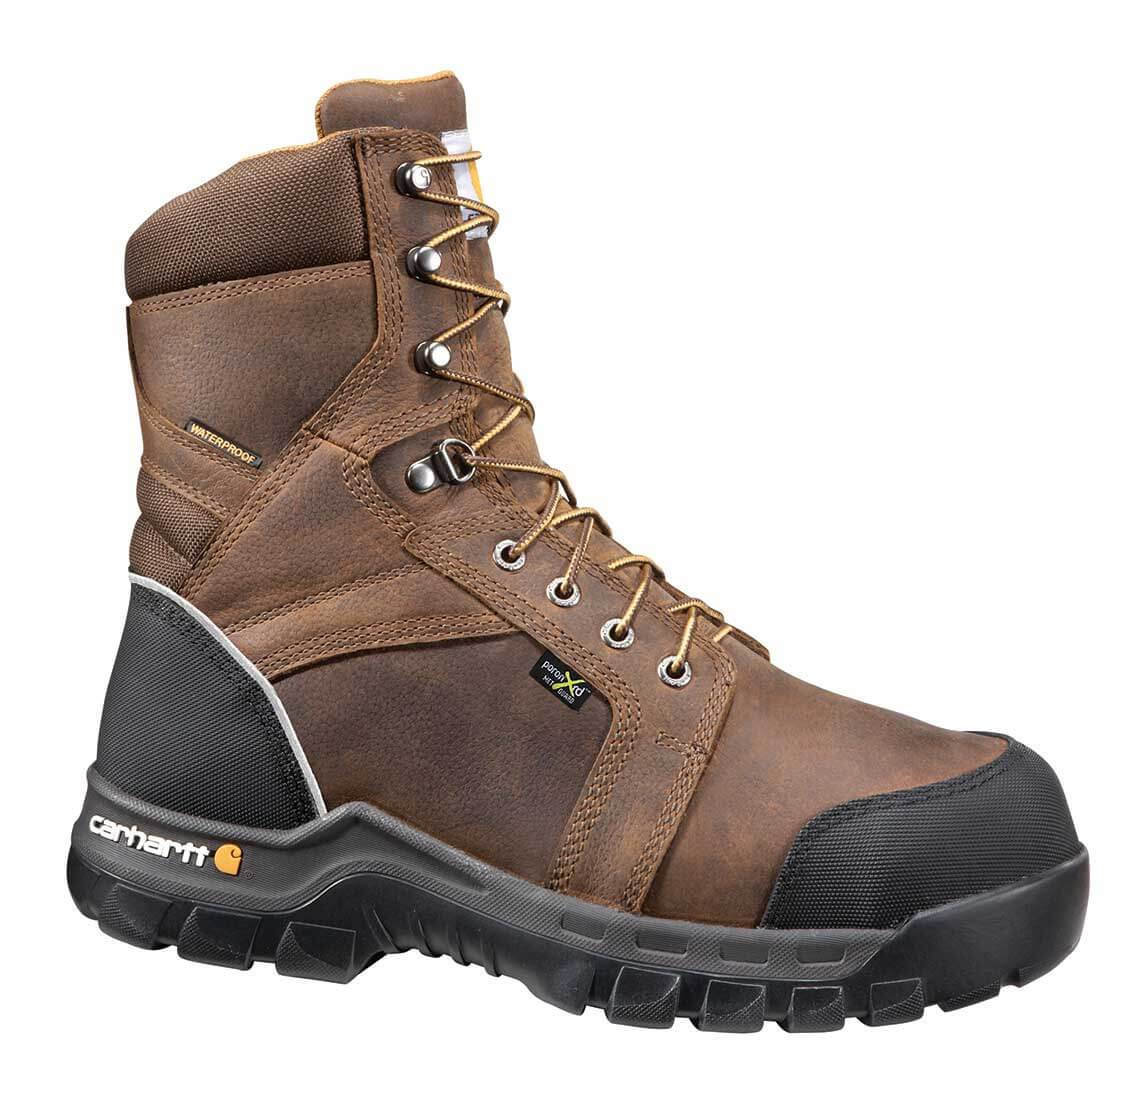 Carhartt - CMF8720 - Rugged Flex Men's Brown Leather Waterproof Insulated Composite Safety Toe 8 Lace-up Work Boot